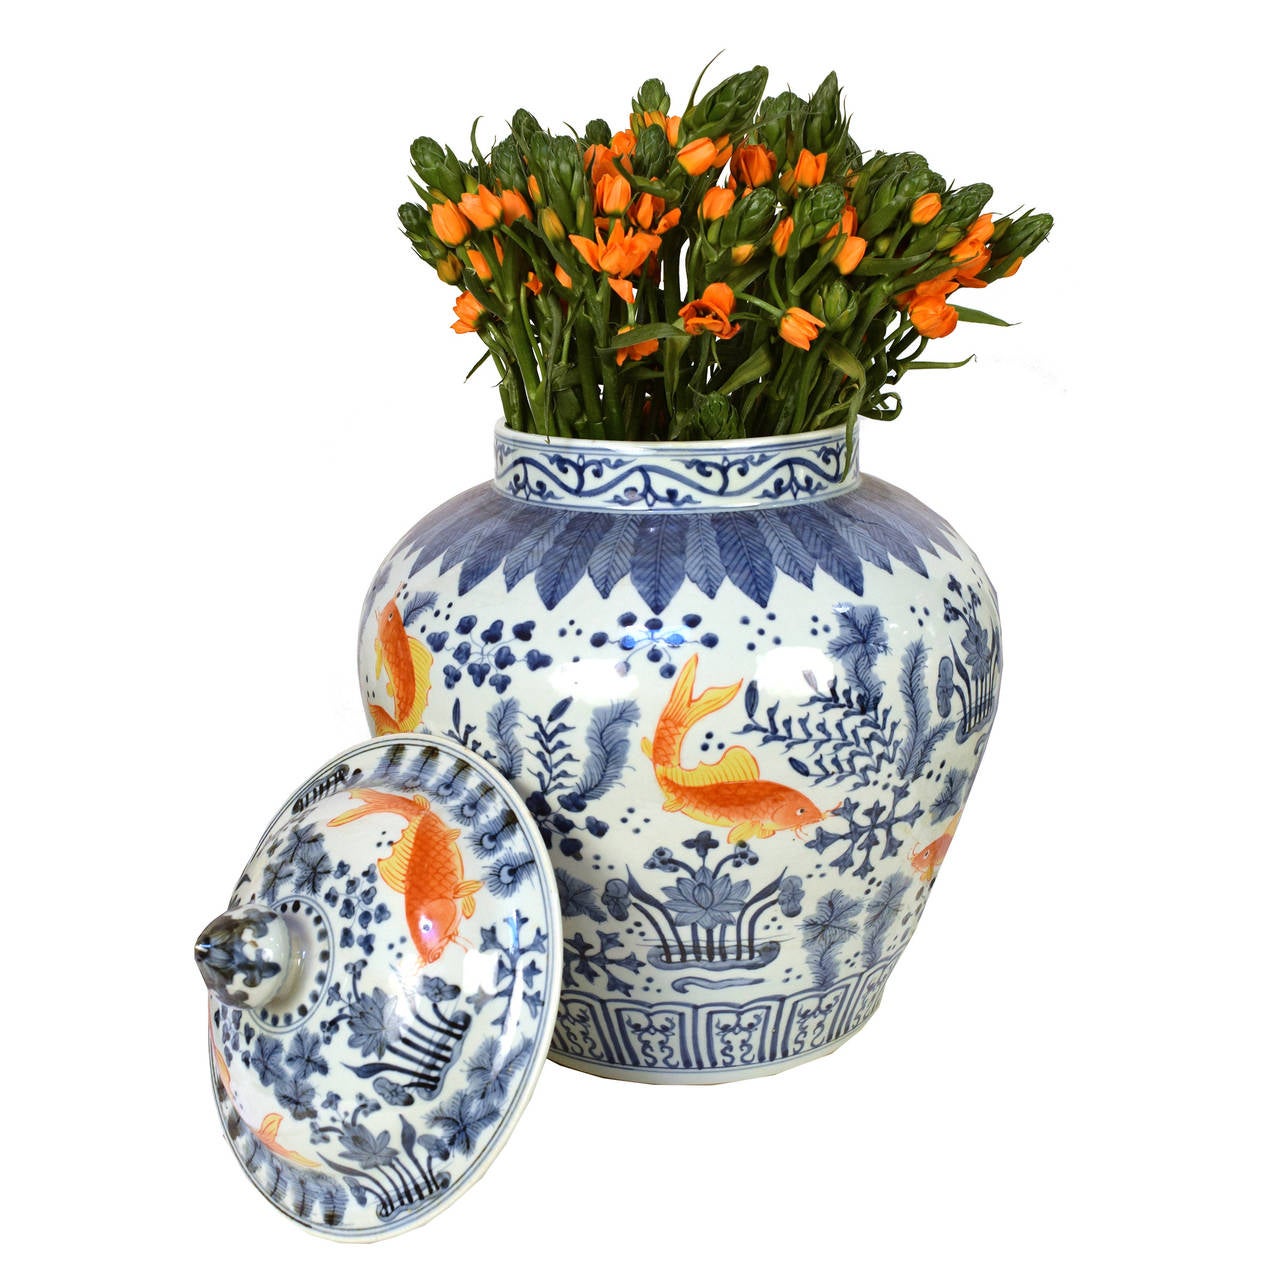 A pair of blue and white jars from Beijing, China with lids and golden yellow fish amongst a floral and vine motif.

Pagoda Red Collection # BJCC026